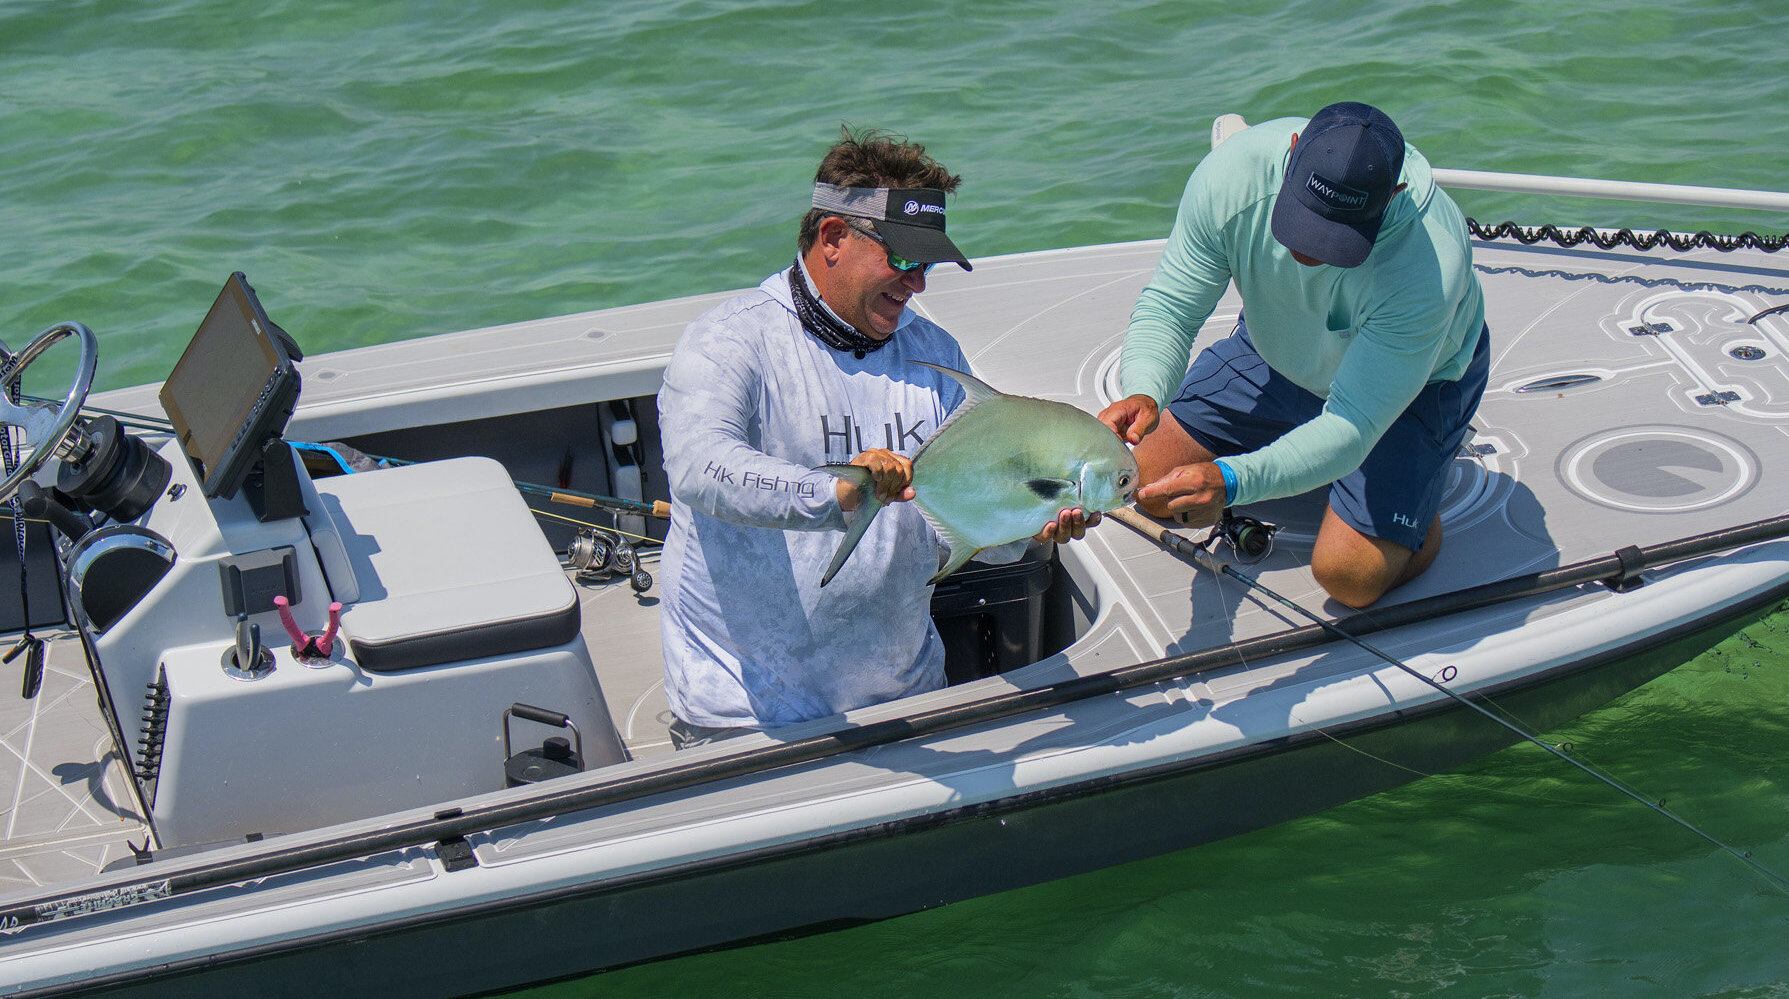 Inshore Fishing: Hot Bites From East to West - St. Croix Rod